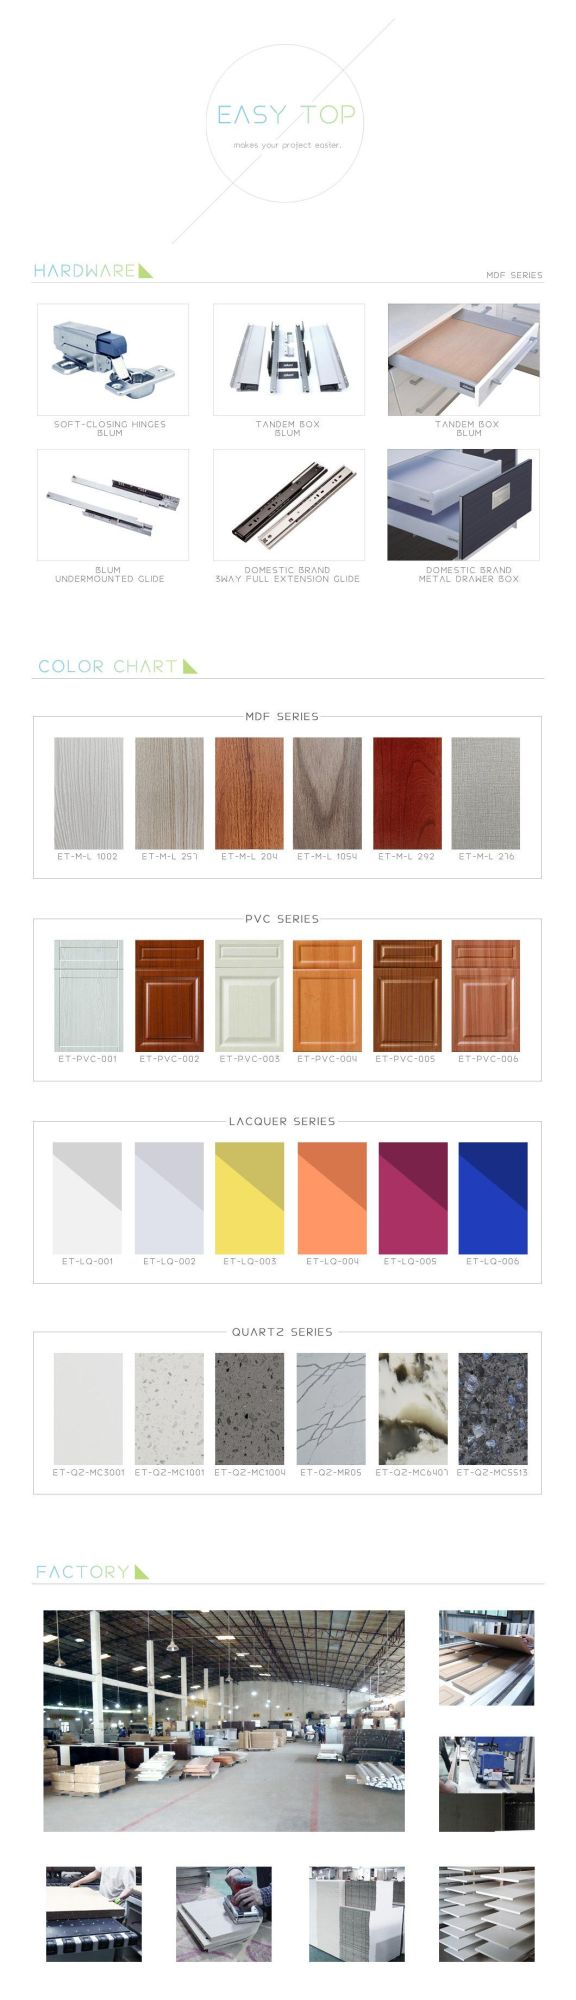 Residential Projects L-Shaped Flat Panel Handle Pull Wooden Timber Modern Kitchen Cabinets Foshan